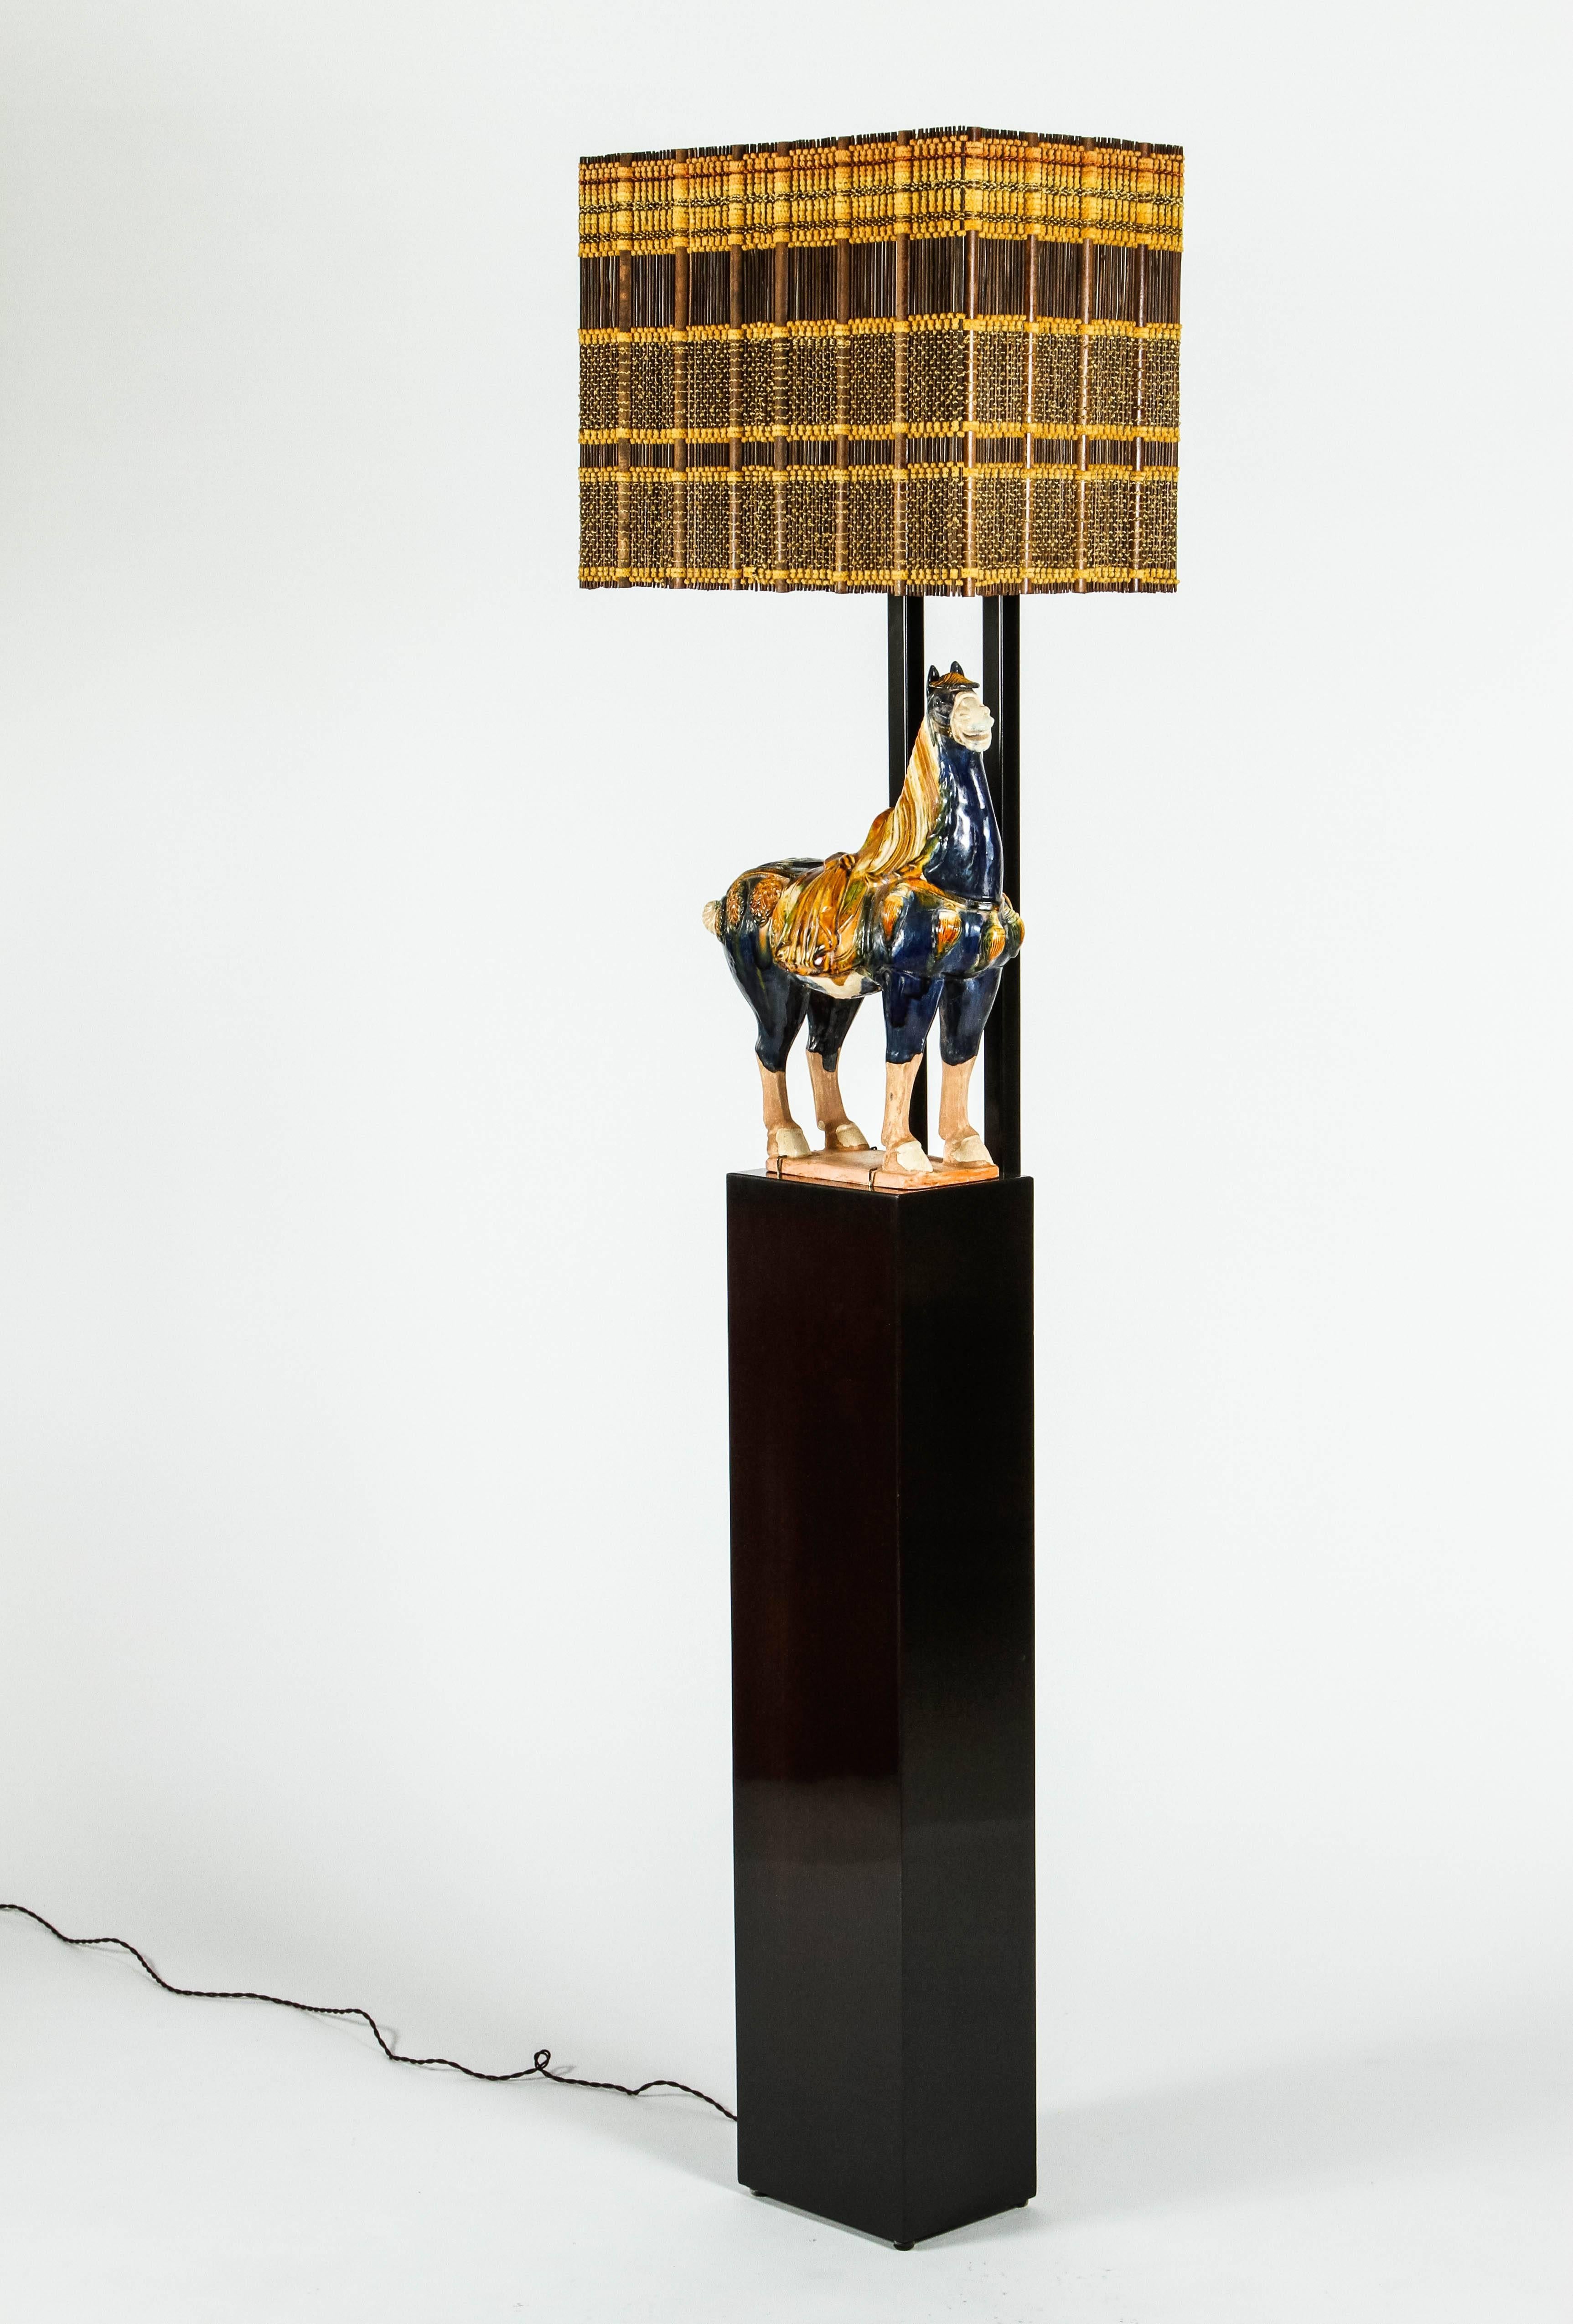 Wonderful armature floor lamp by William Haines featuring a Chinese horse and custom-made Maria Kipp shade. The lamp is a highly polished dark brown walnut with a black metal armature. The horse figure is not original to the lamp but quite often the